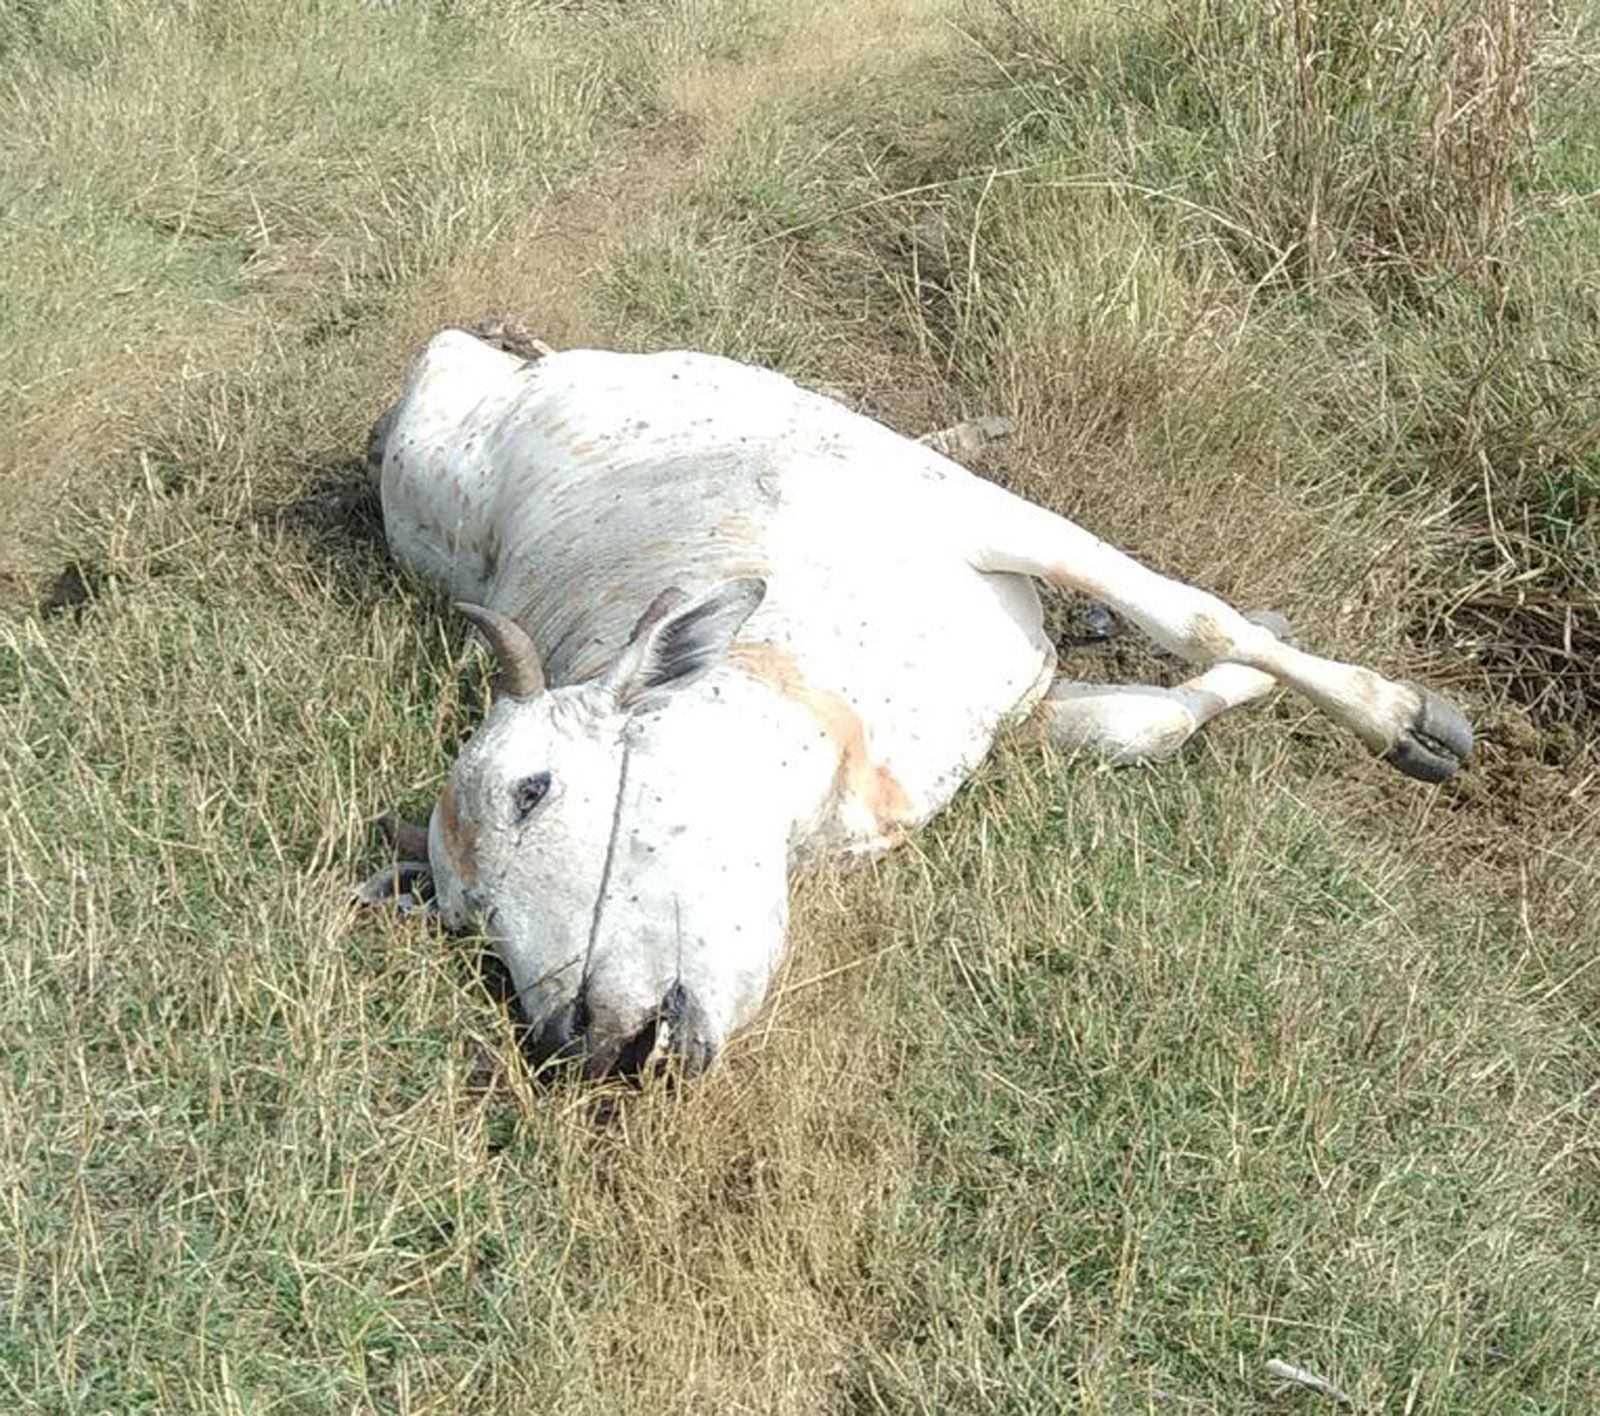 Angry Farmer Killed a Cattle Who Entered In His Farm